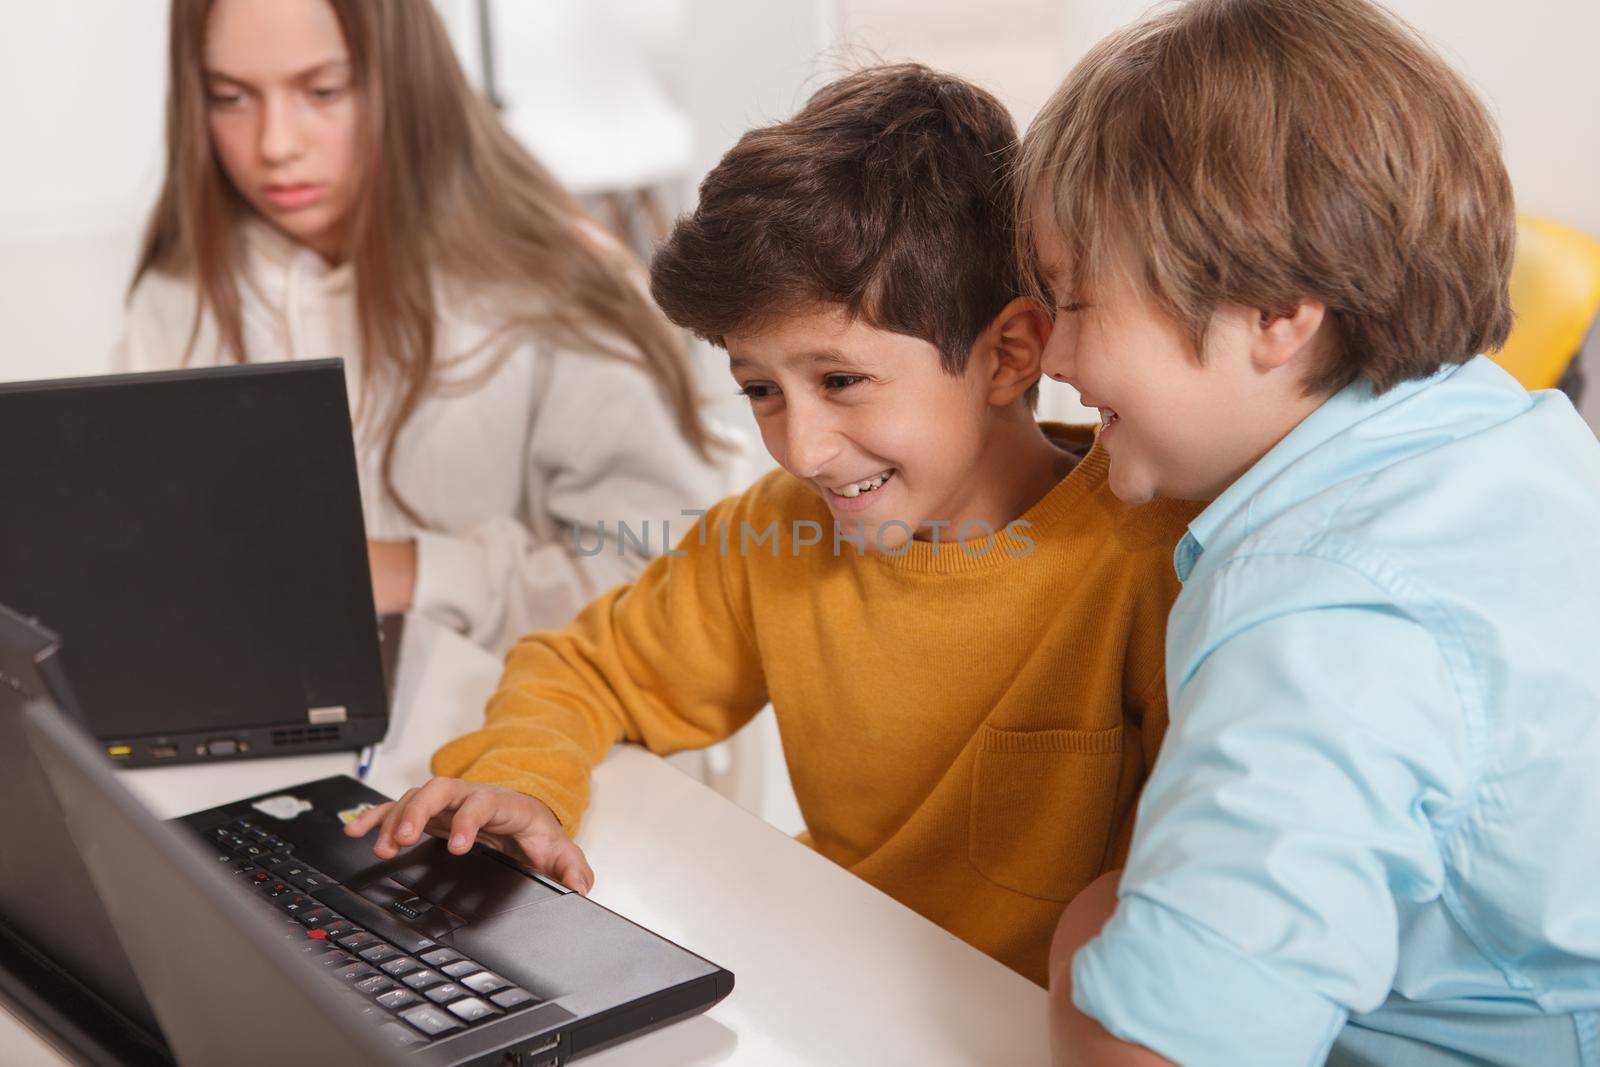 Cute little boys laughing, having fun studying together, using laptop